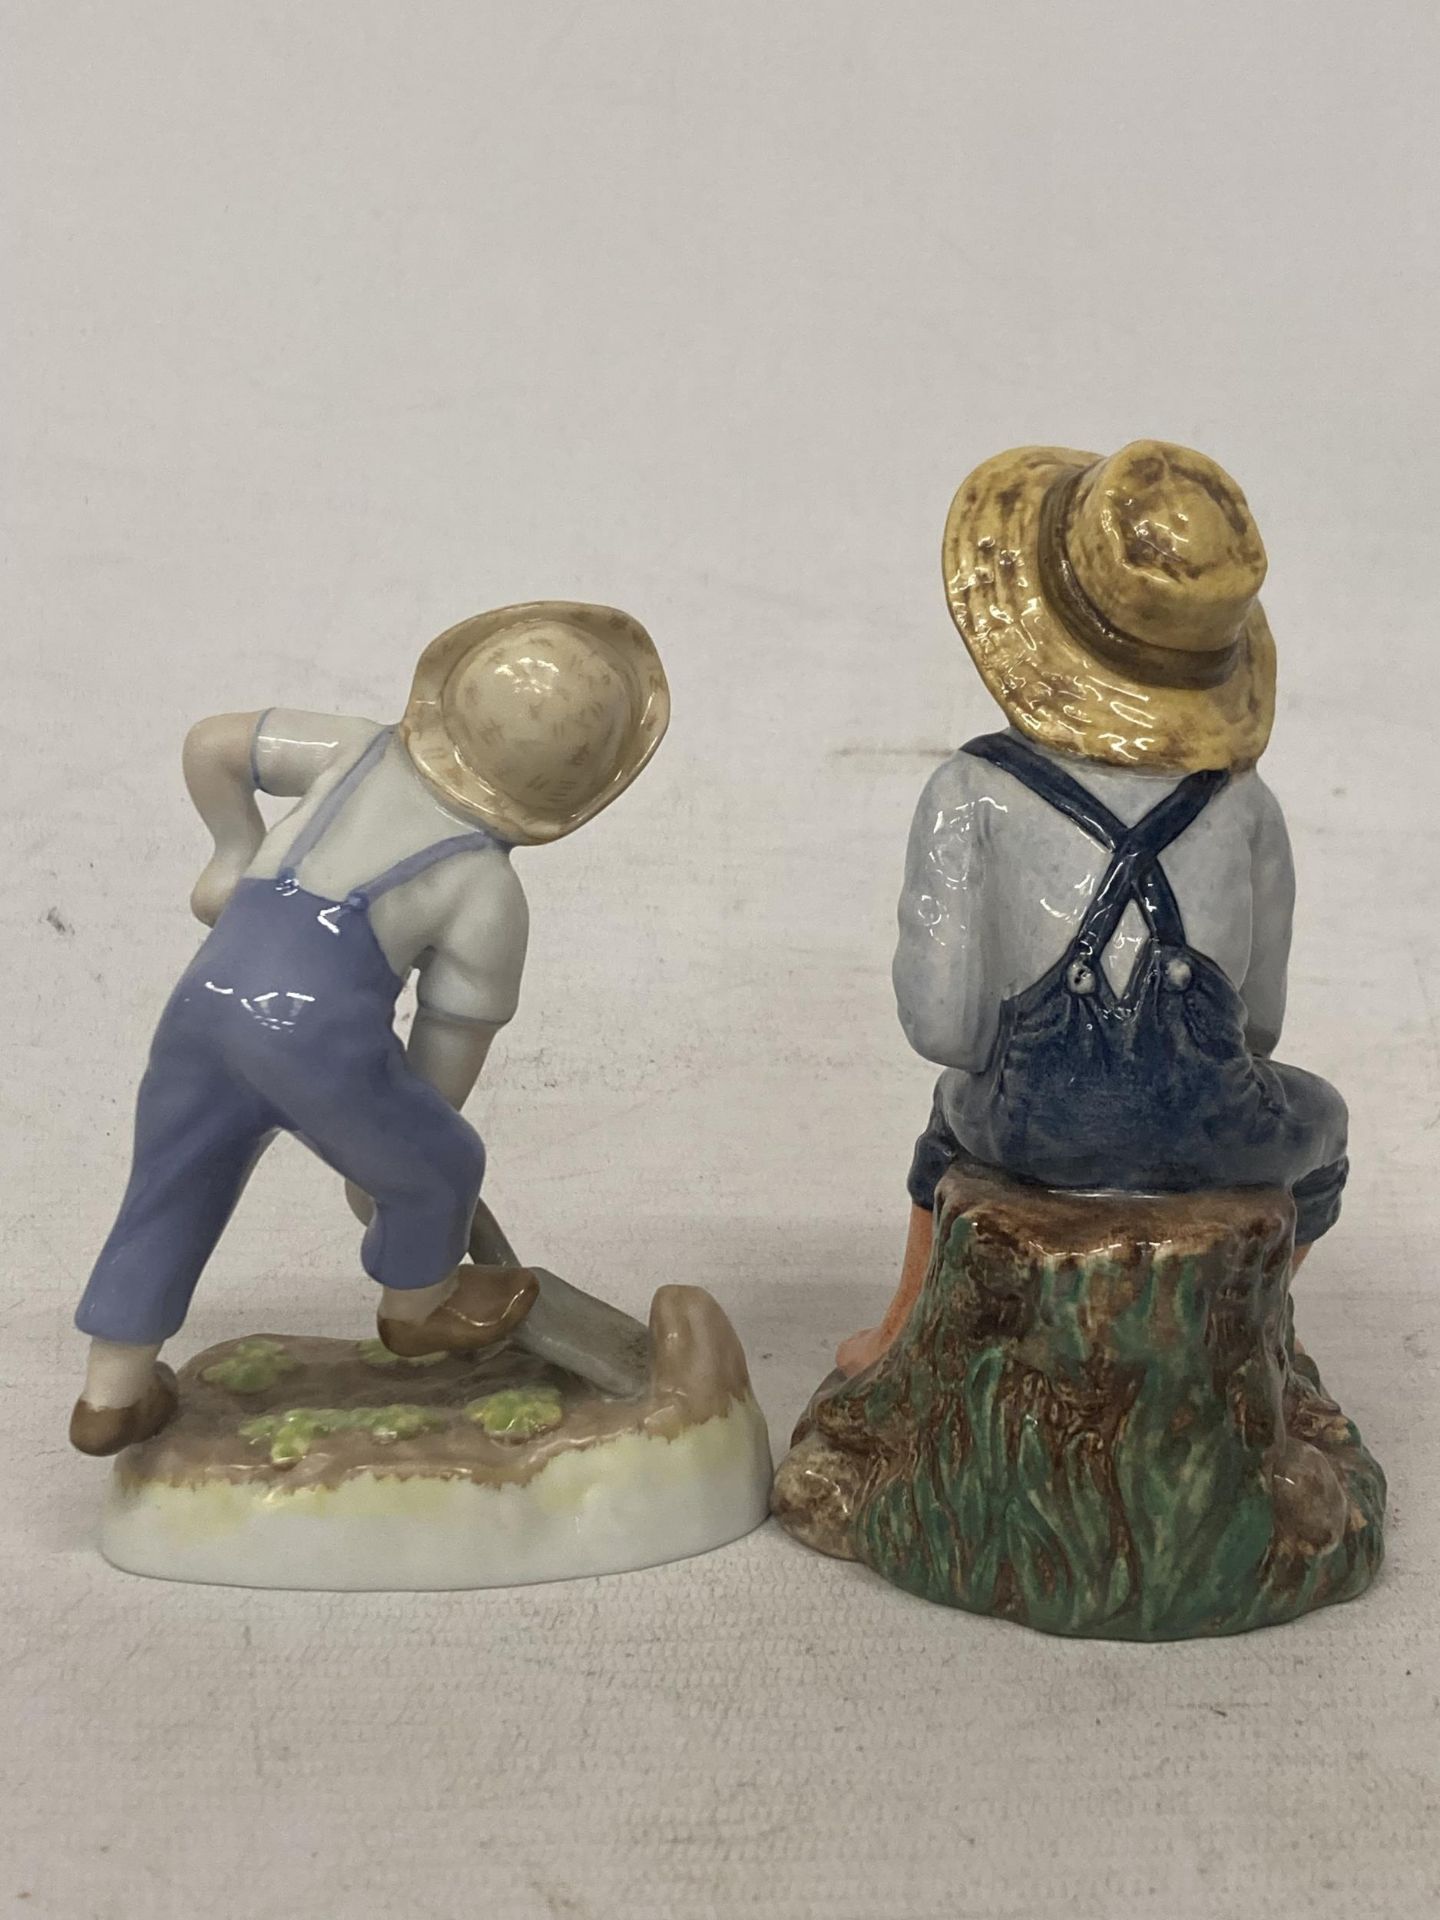 A ROYAL DOULTON FIGURE OF TOM SAWYER HN 2926 TOGETHER WITH A ROYAL WORCESTER FIGURE FROM THE - Image 3 of 5